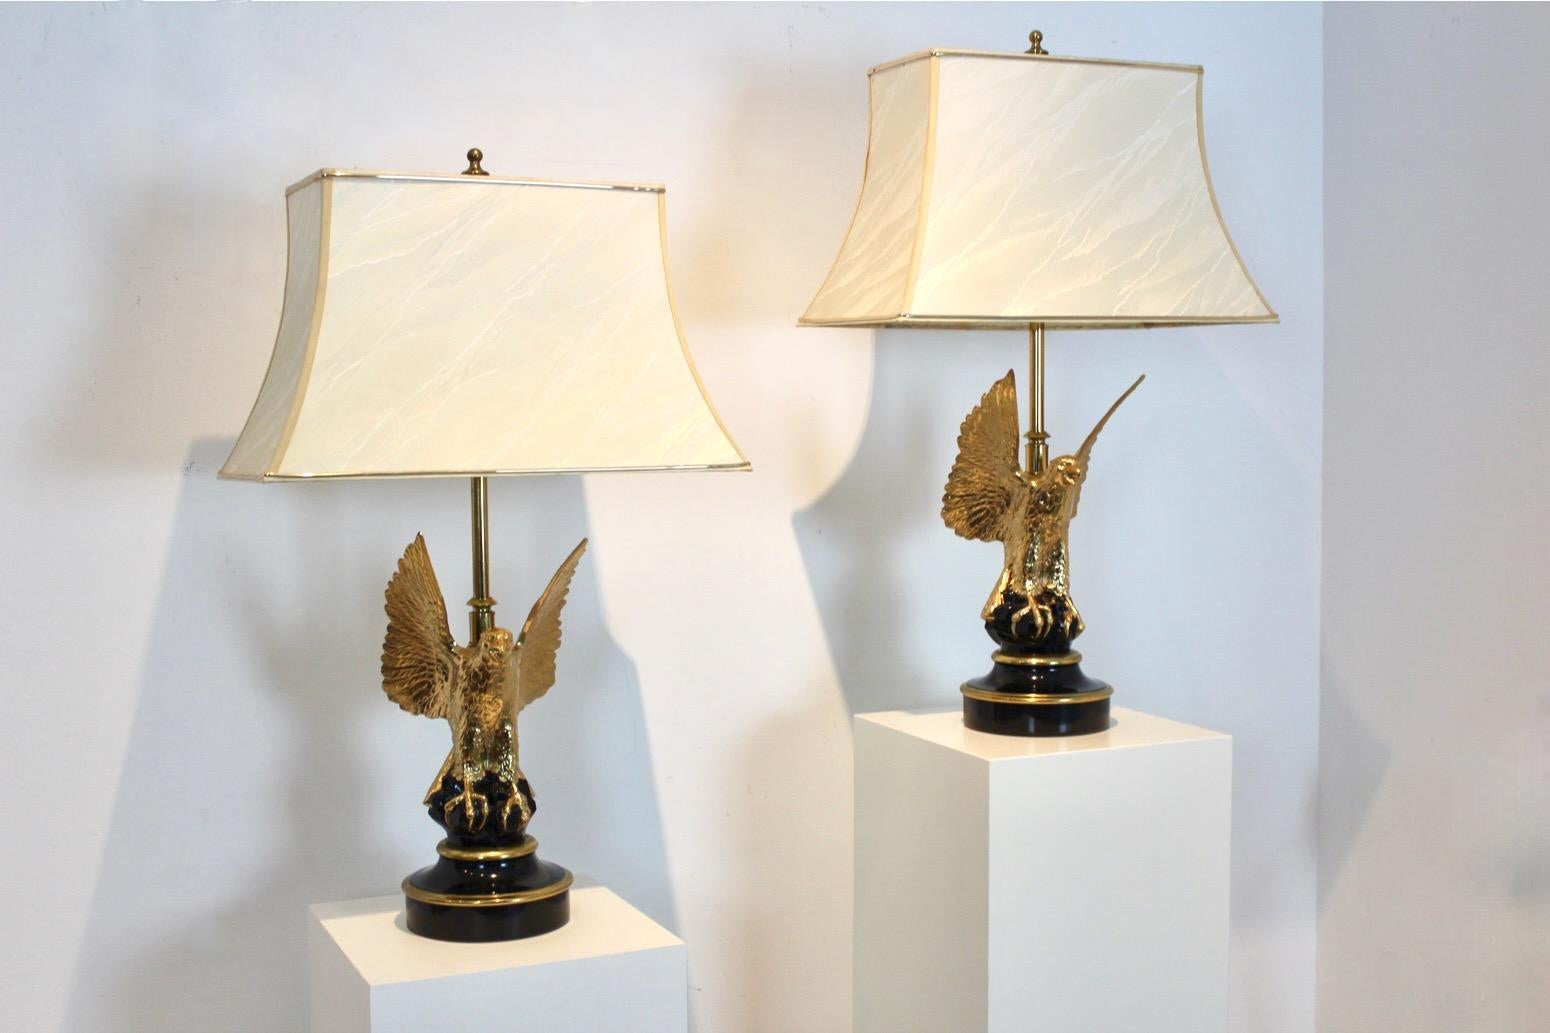 Beautiful Pair of very Large and Solid Brass Mid Century Table Lamps from the ‘70s produced by DeKnudt in Belgium which craftsmanship is renowned for its quality and beauty. Still in very good condition with some normal signs of wear appropriate to